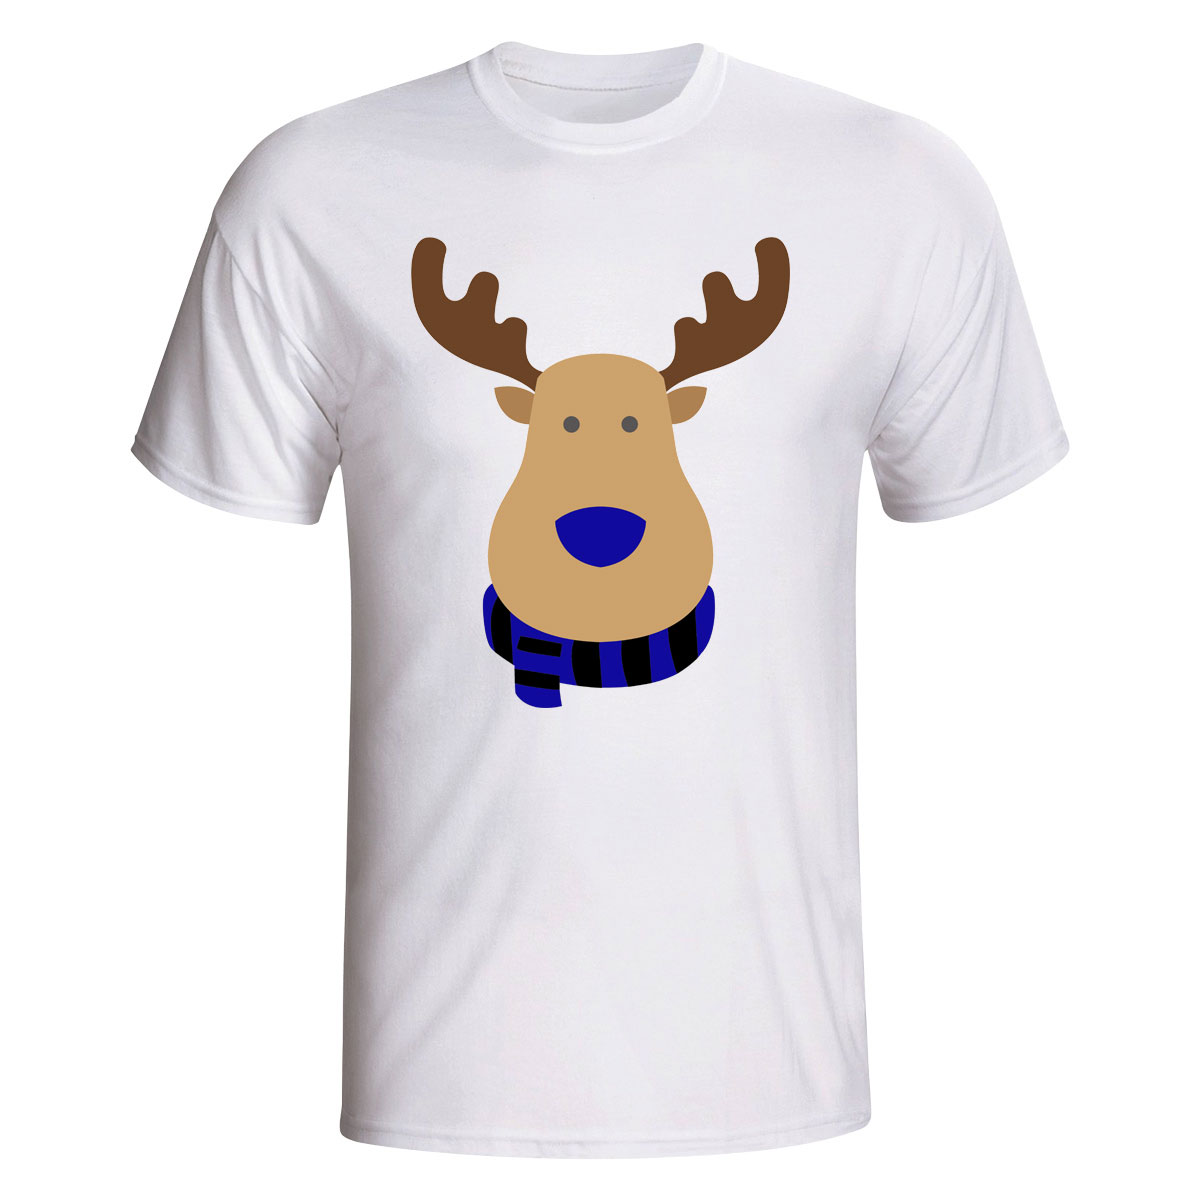 Club Bruuge Rudolph Supporters T-shirt (white)